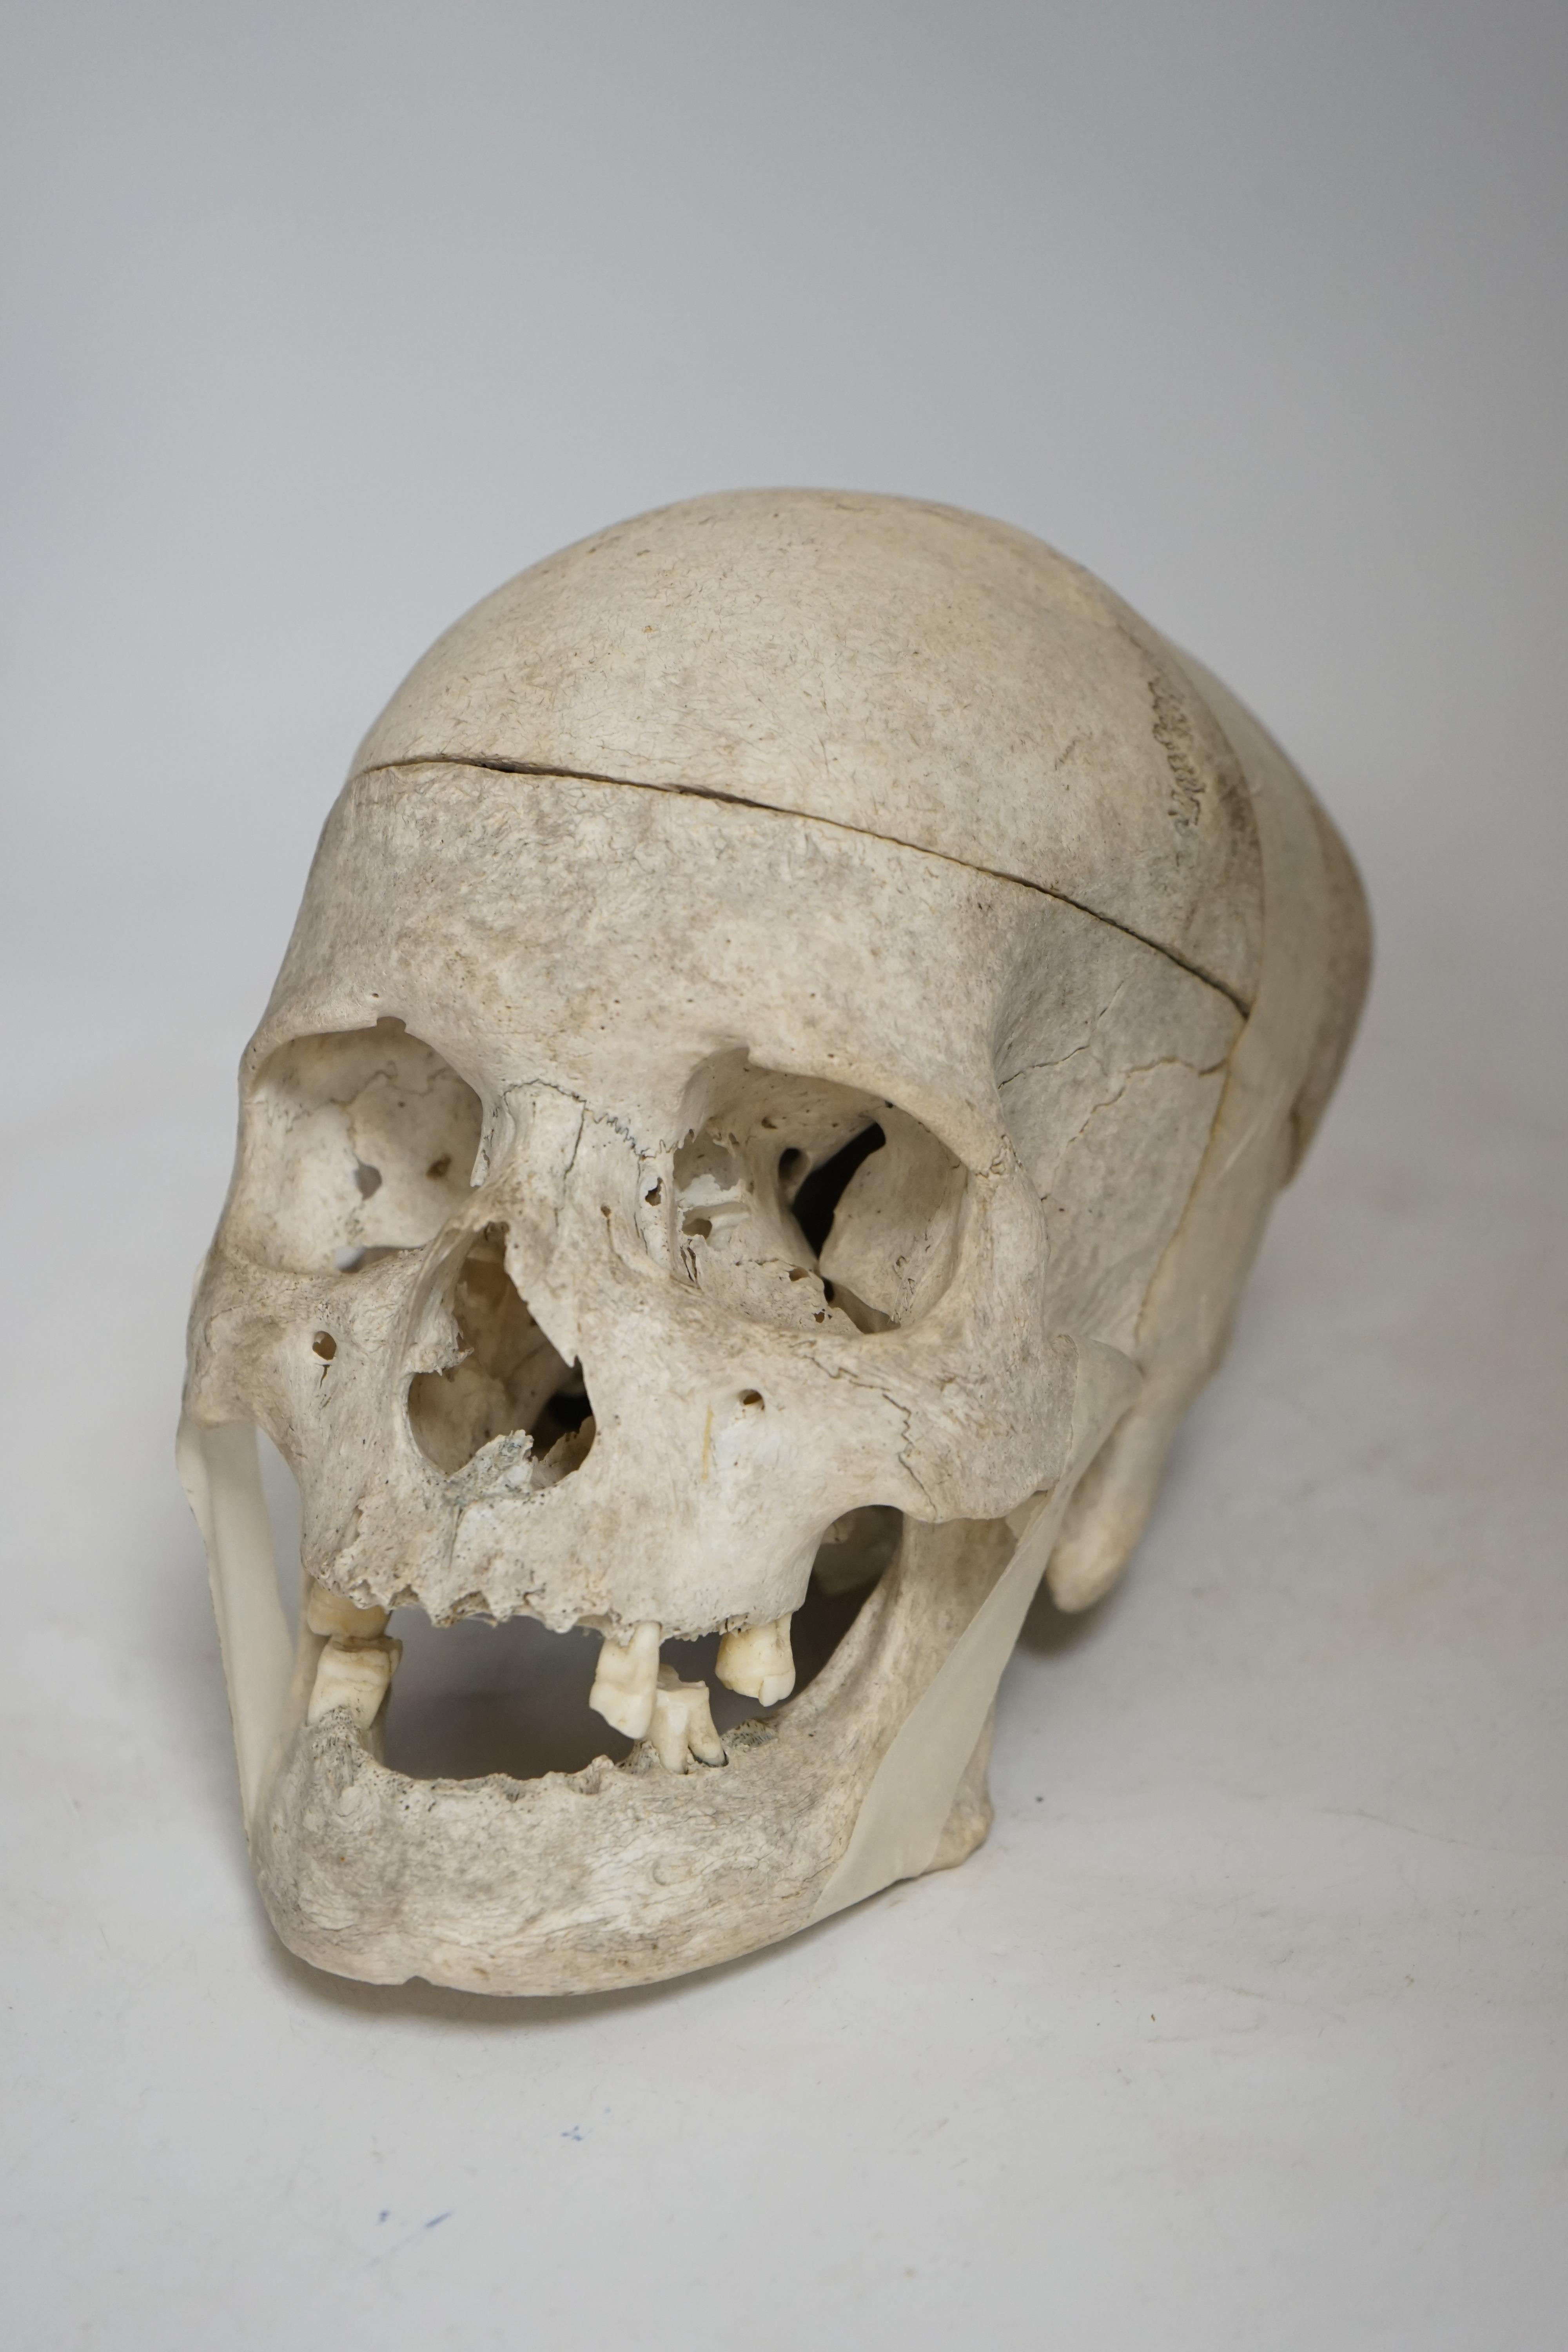 Human Anatomy - An Antique anatomical human skull, with lower jaw